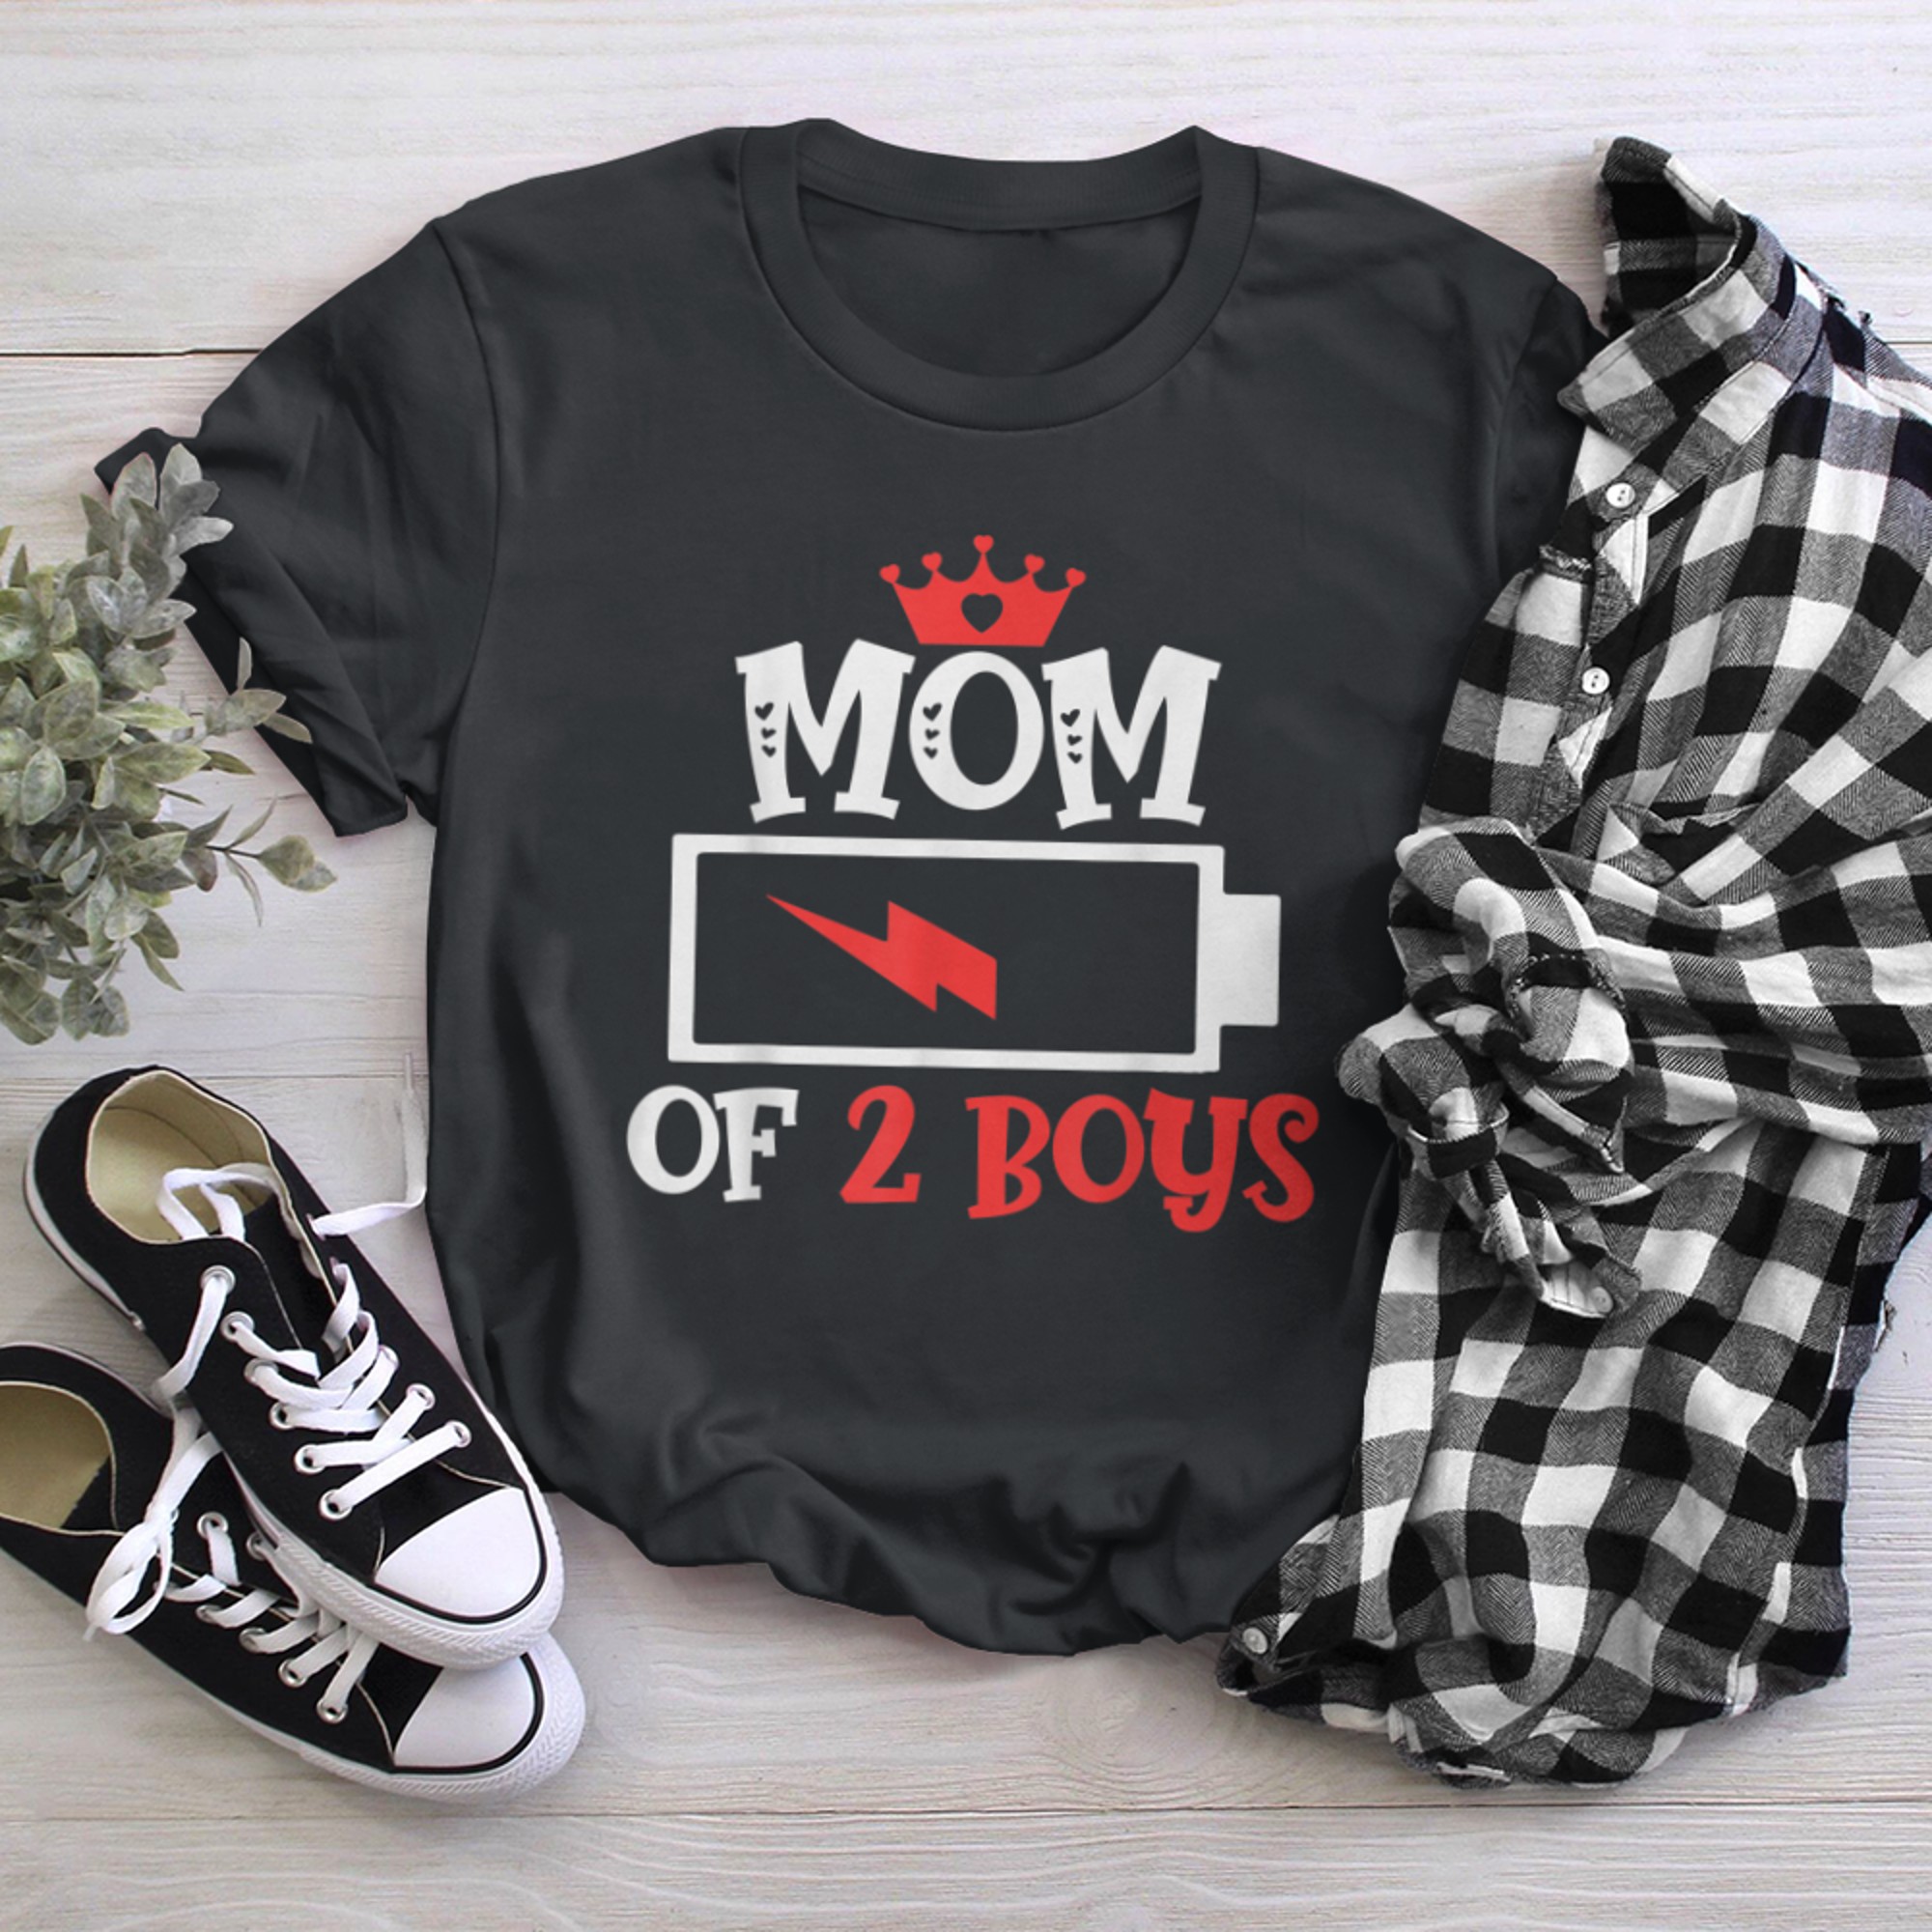 Mom Of Mothers Day t-shirt black